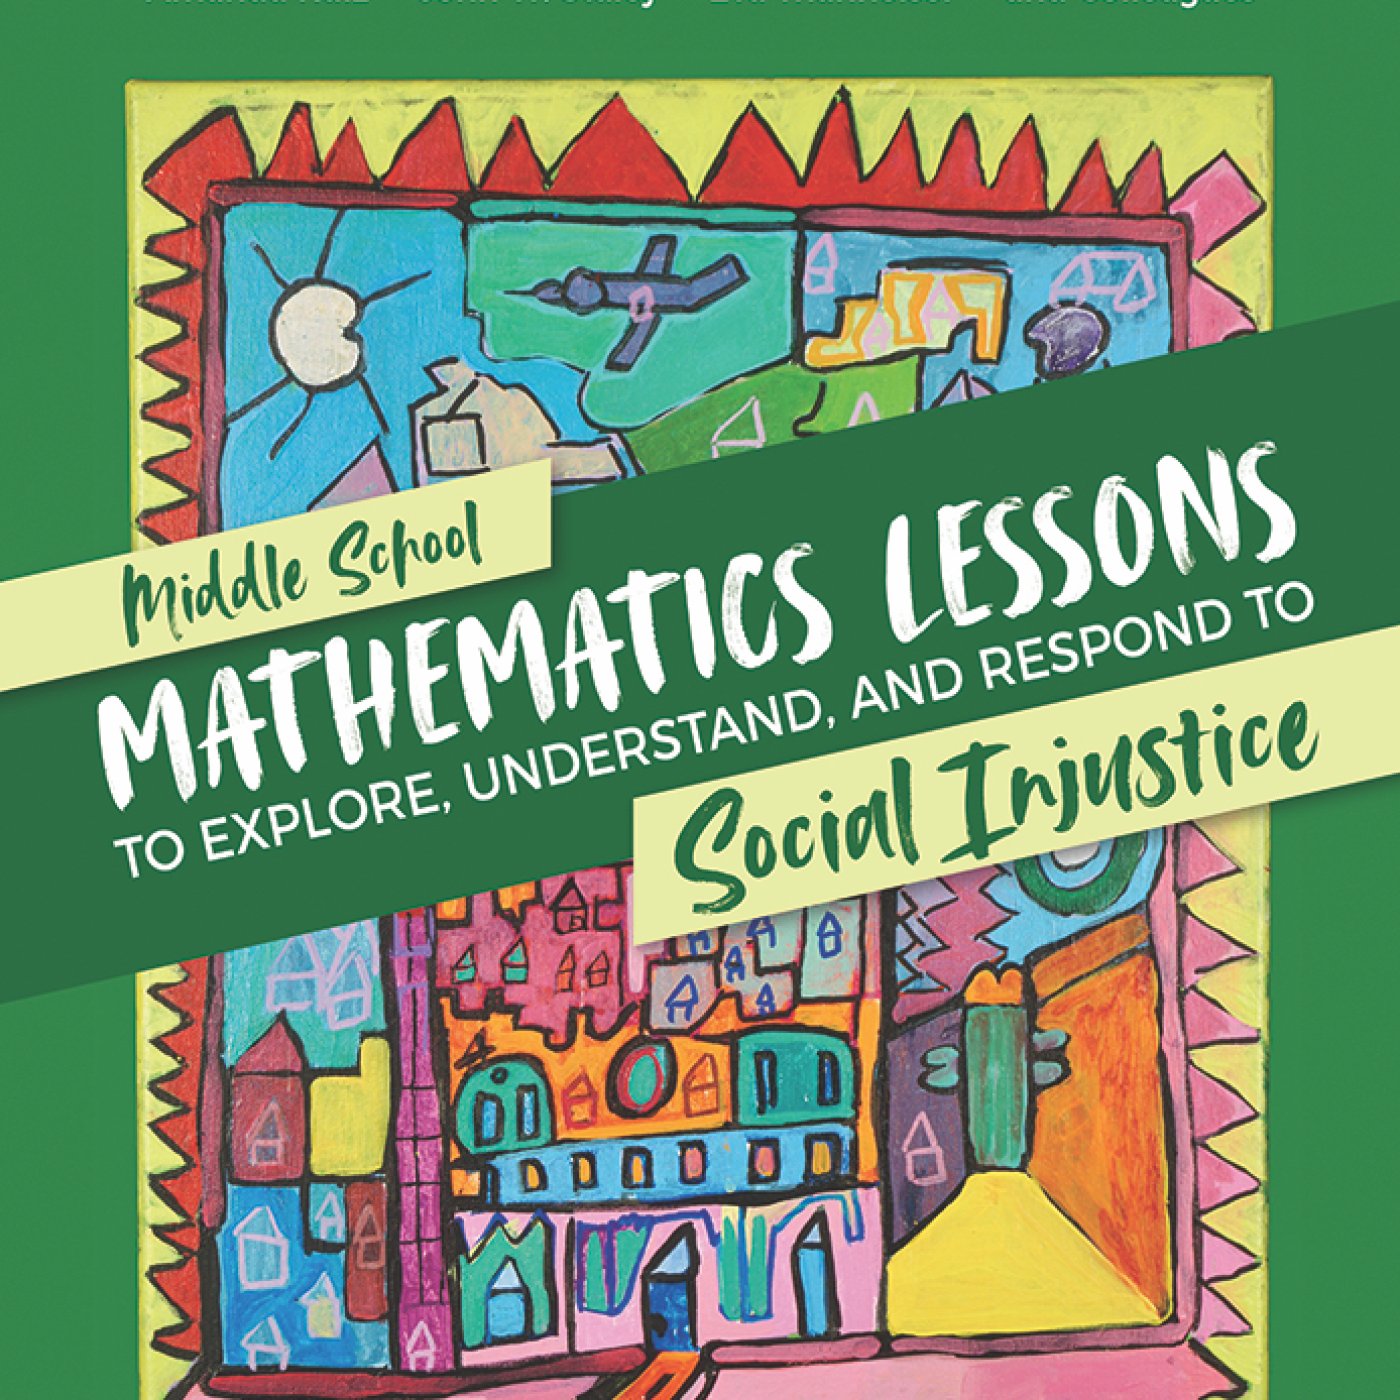 cover of "Middle School Mathematics Lessons to Explore, Understand, and Respond to Social Injustice"